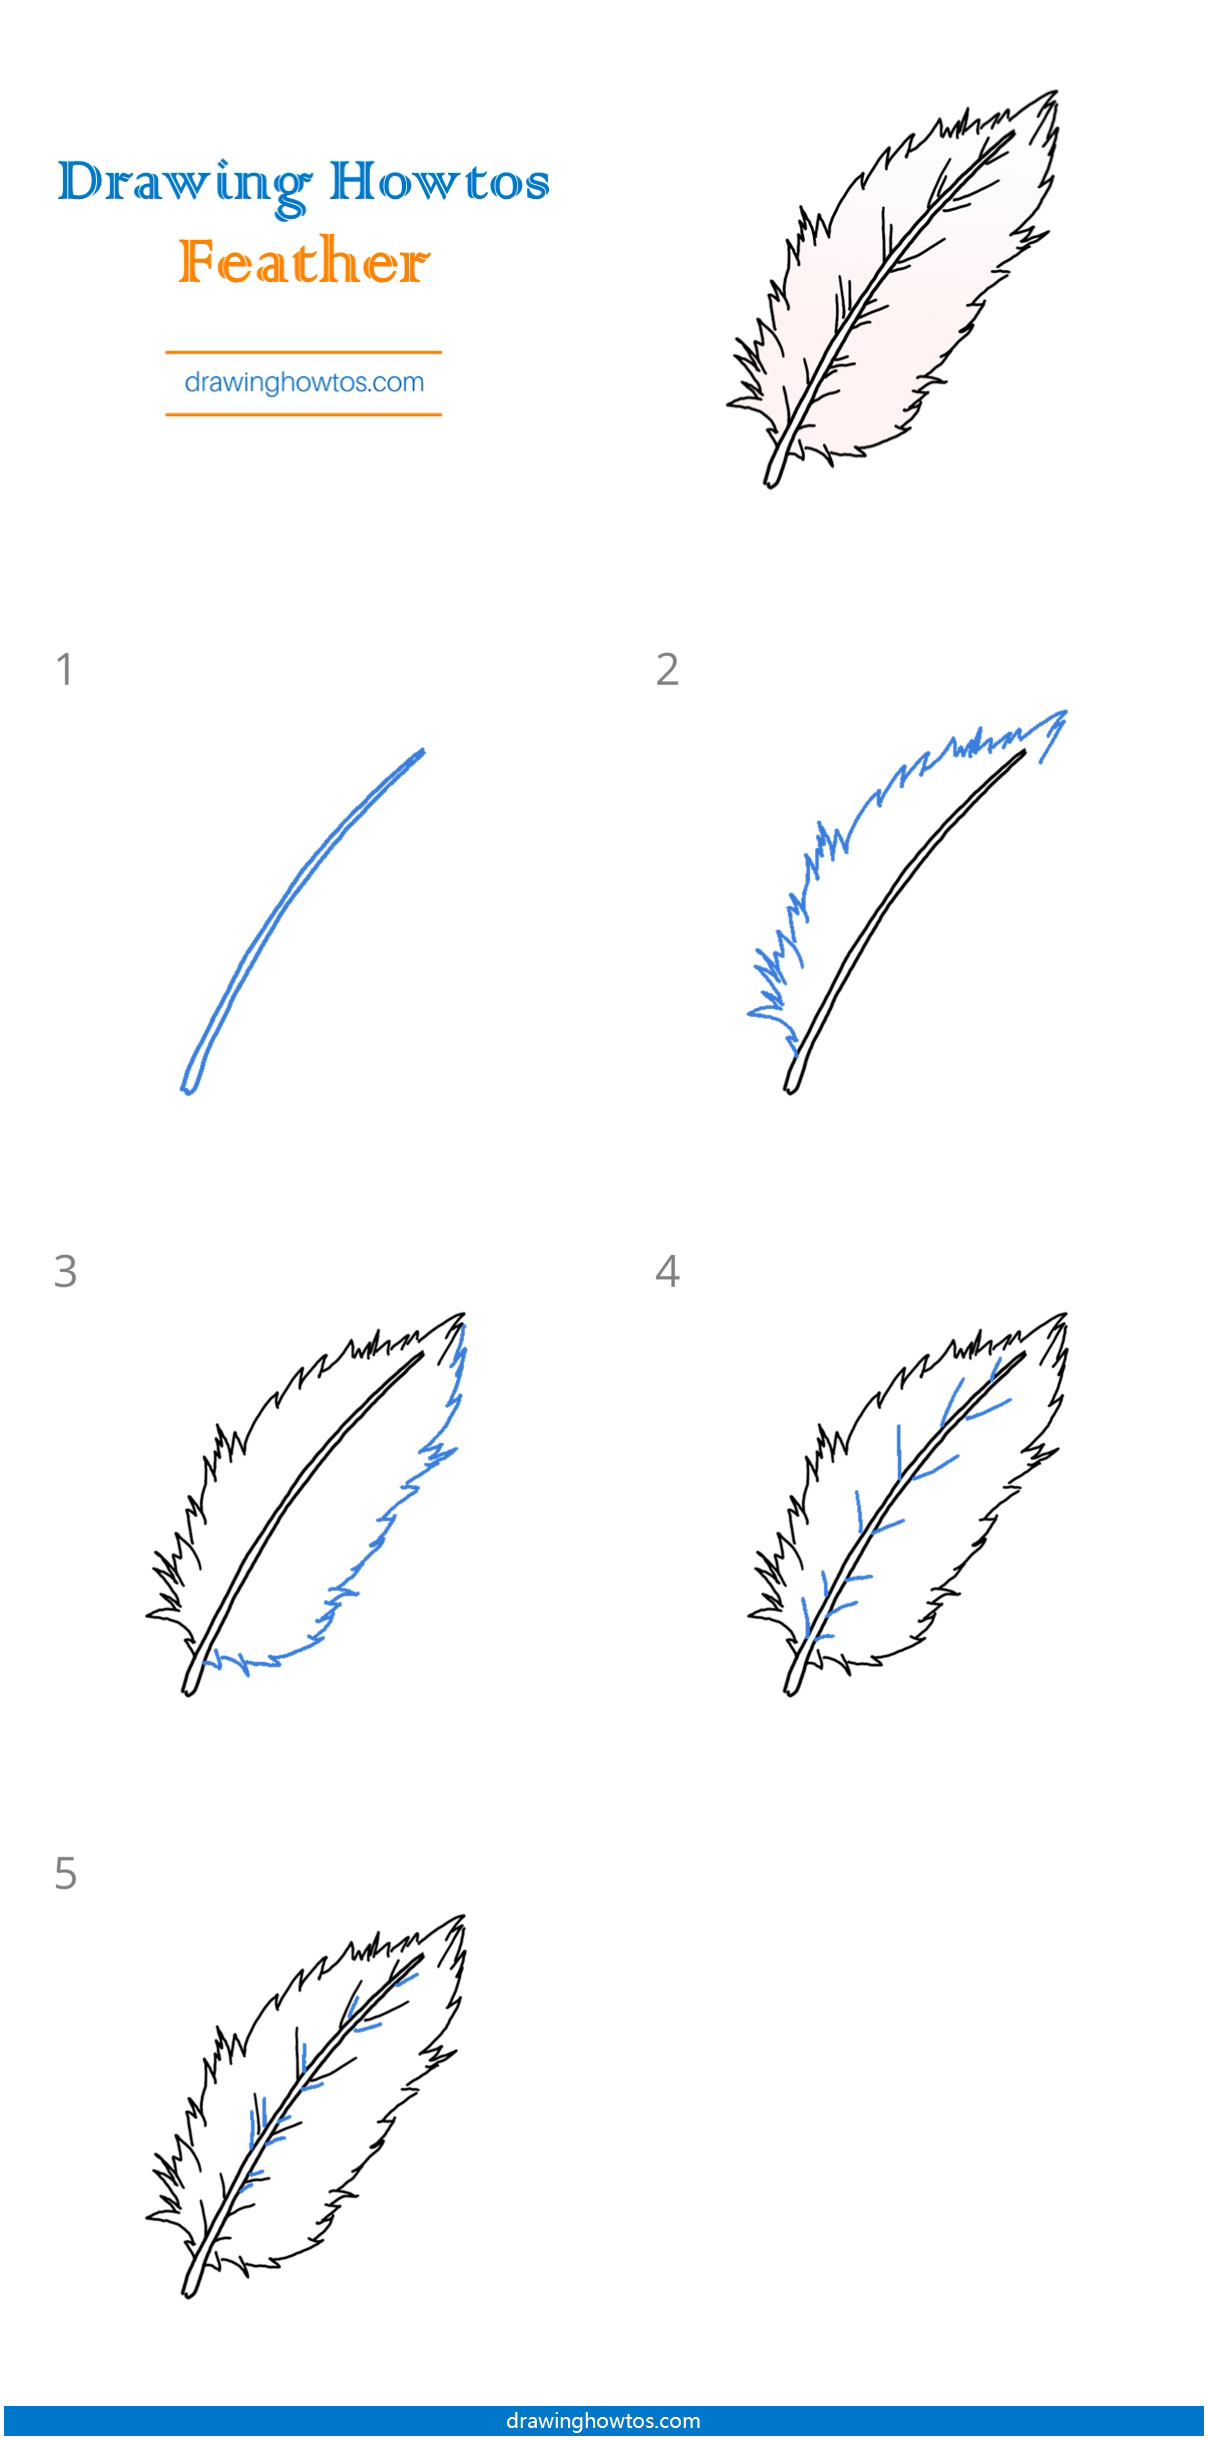 How to Draw a Feather - Step by Step Easy Drawing Guides - Drawing Howtos